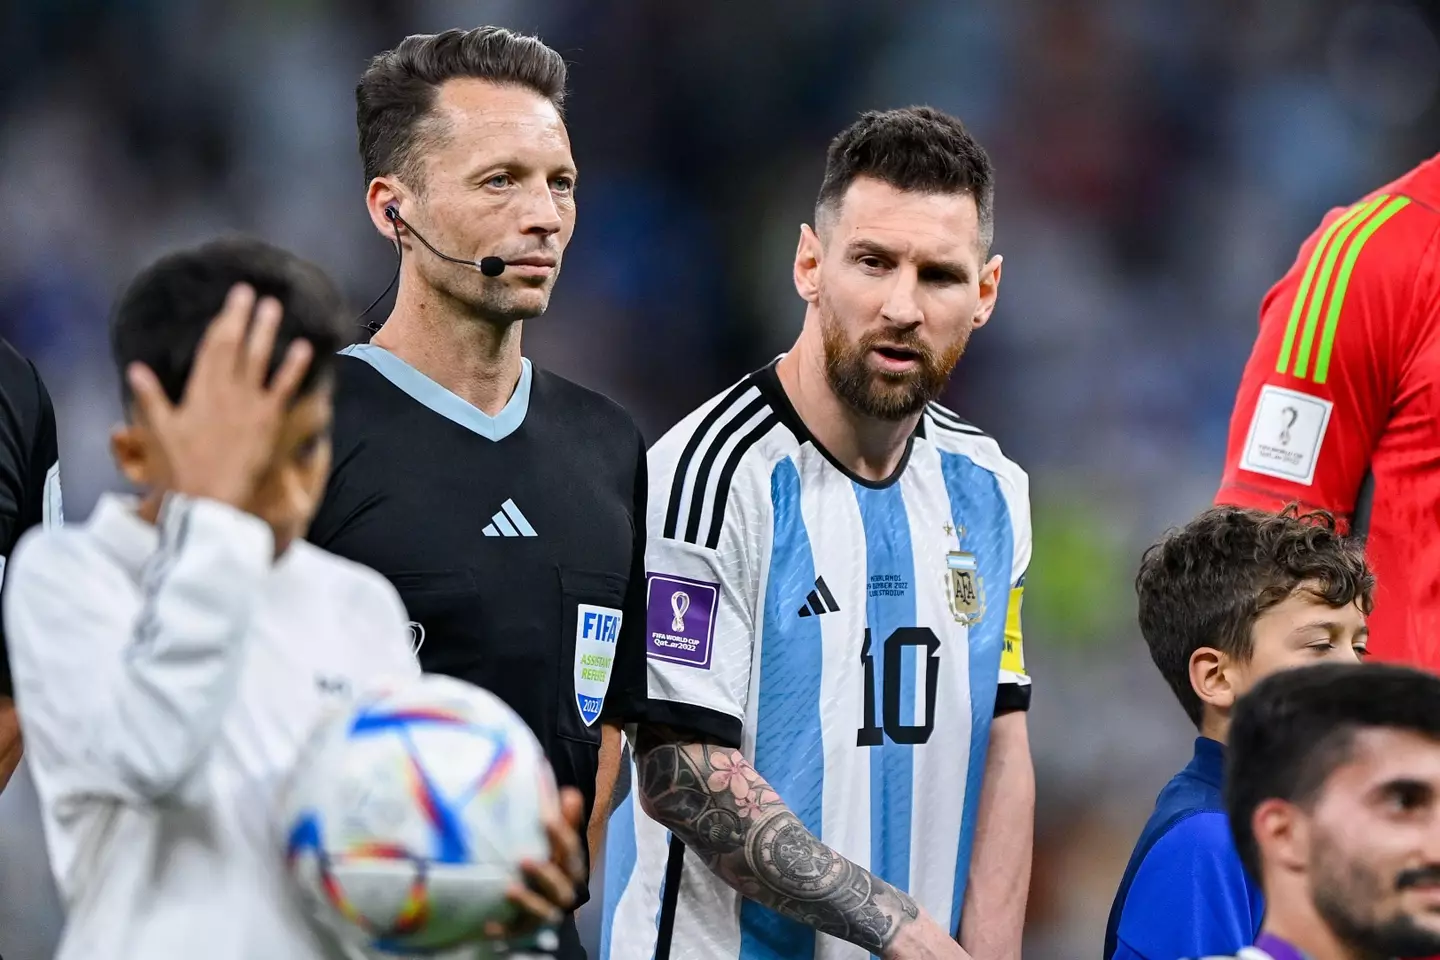 Will Lionel Messi lift the World Cup with Argentina in Qatar?